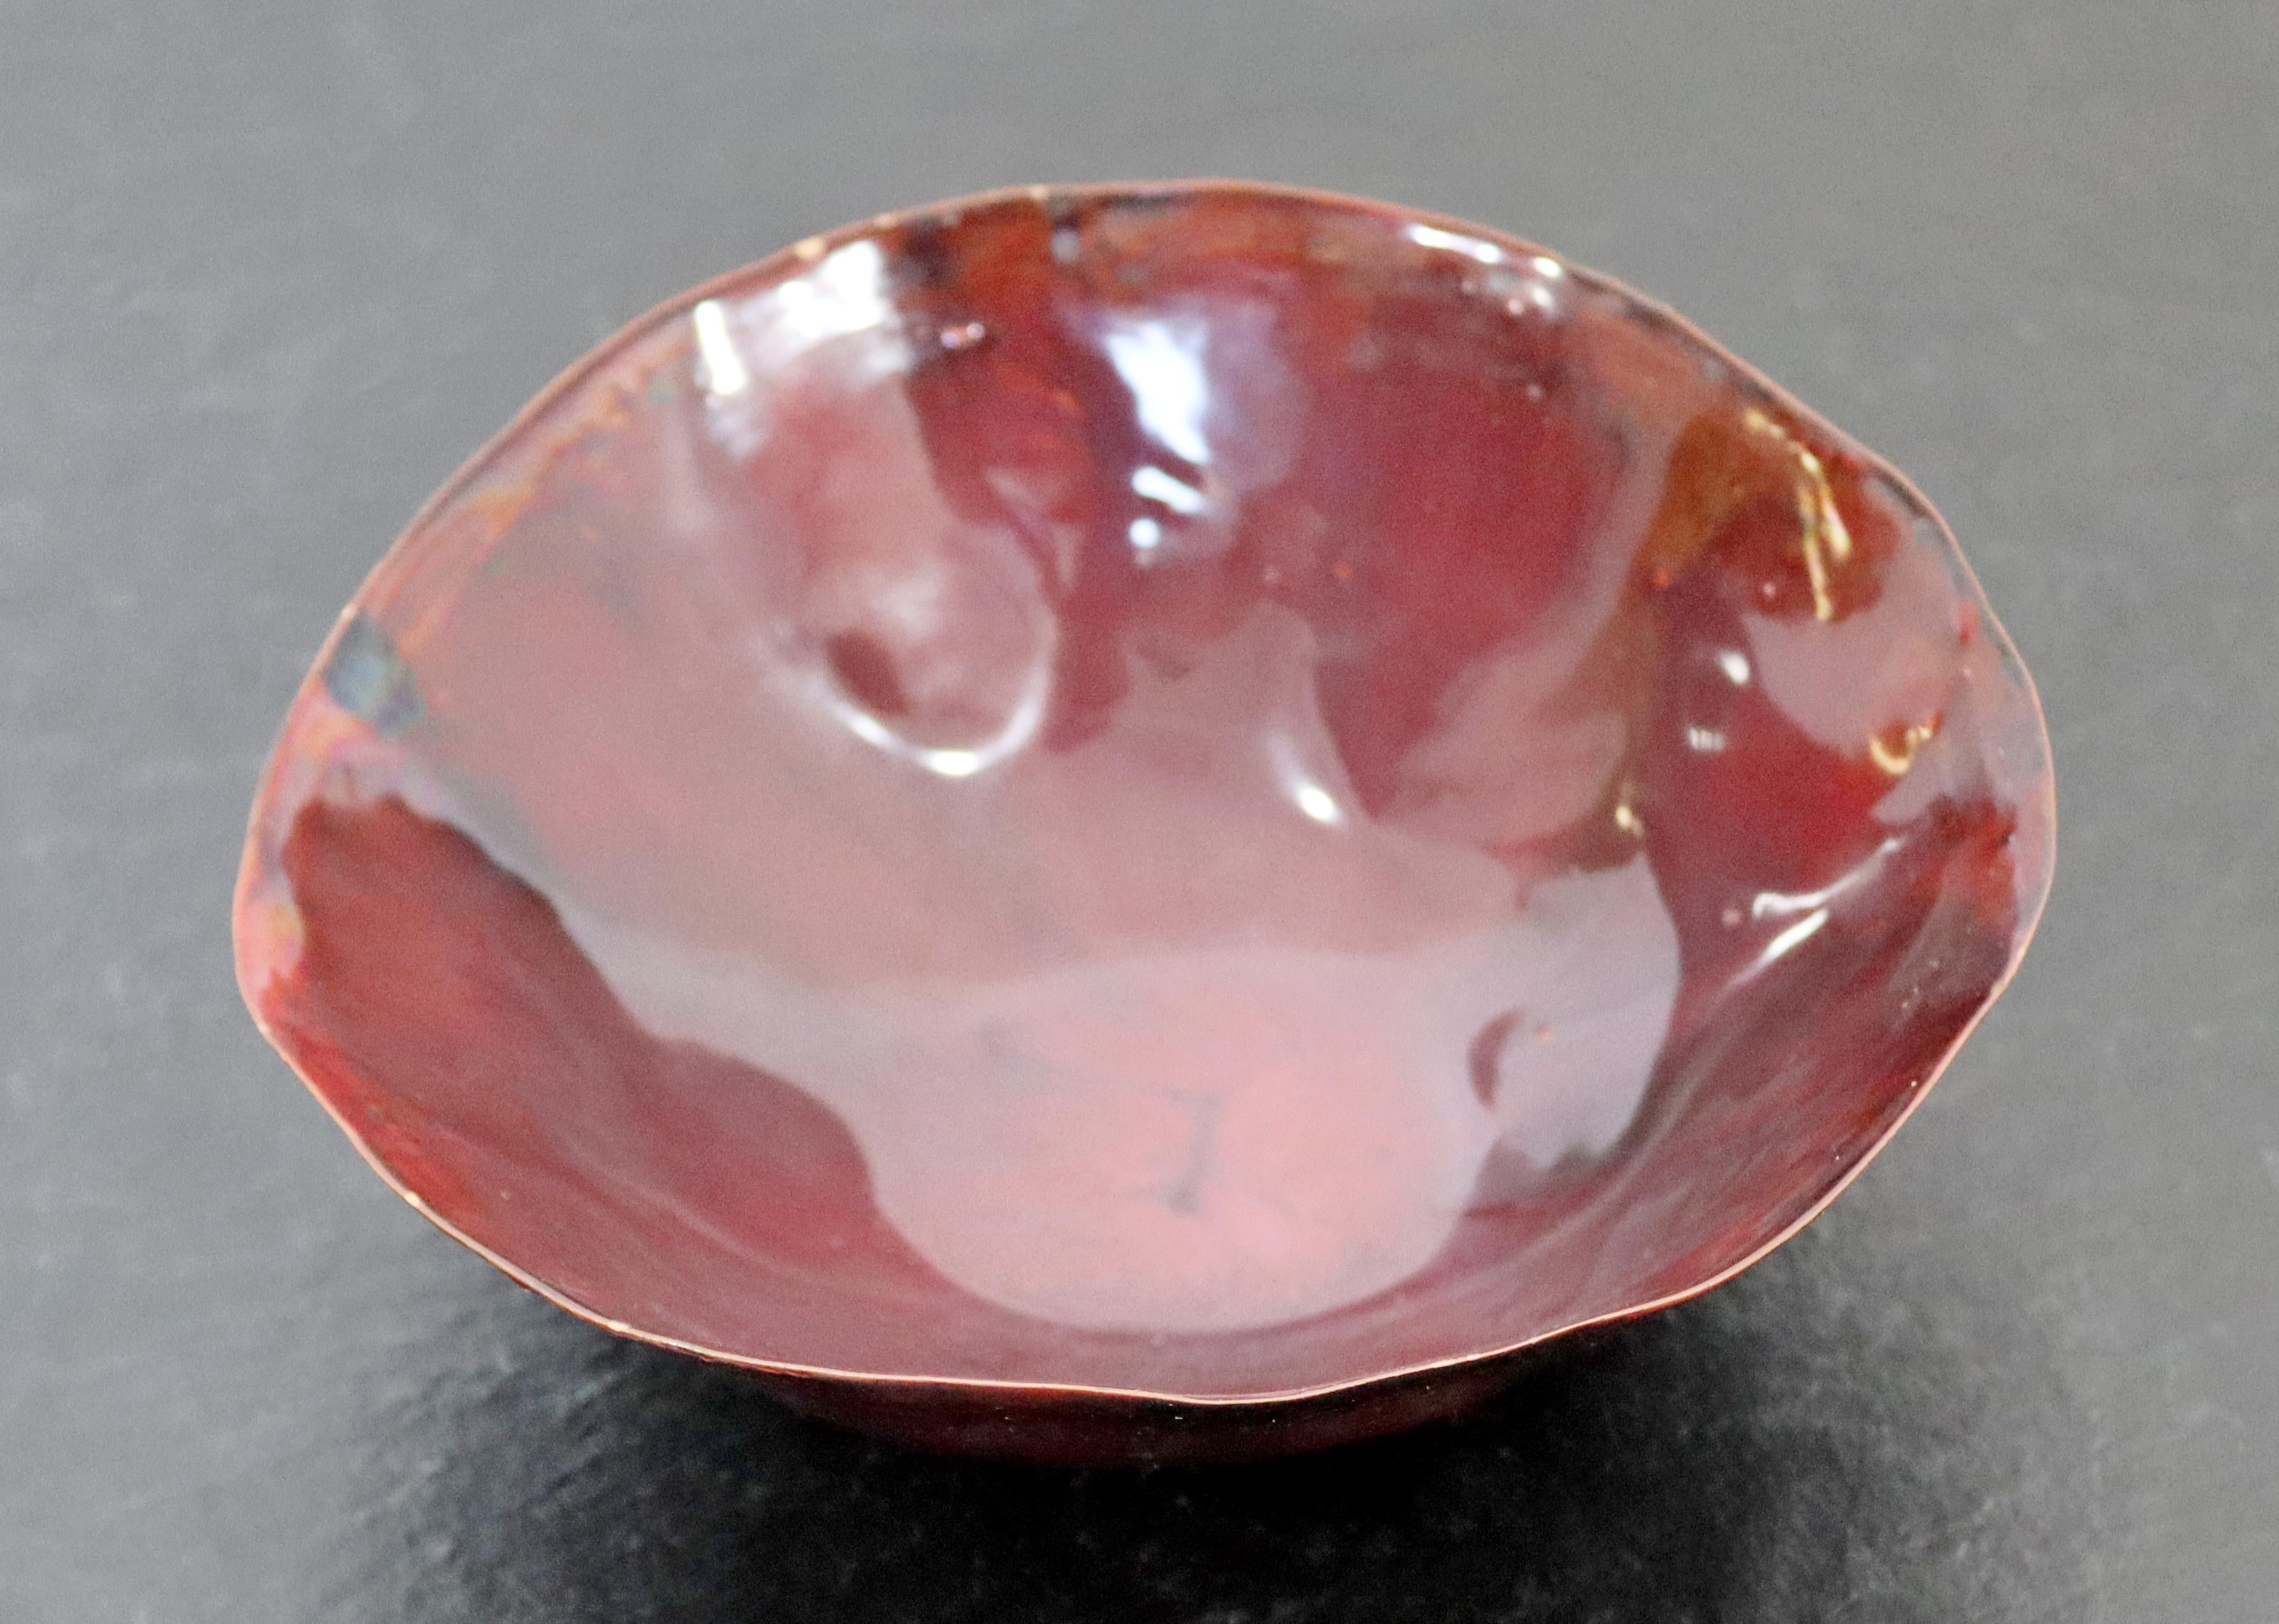 For your consideration is an outstanding, small, glossy ceramic bowl, made in Italy, by Fausto Melotti with his insignia, circa 1956. In excellent condition. The dimensions are 5.5